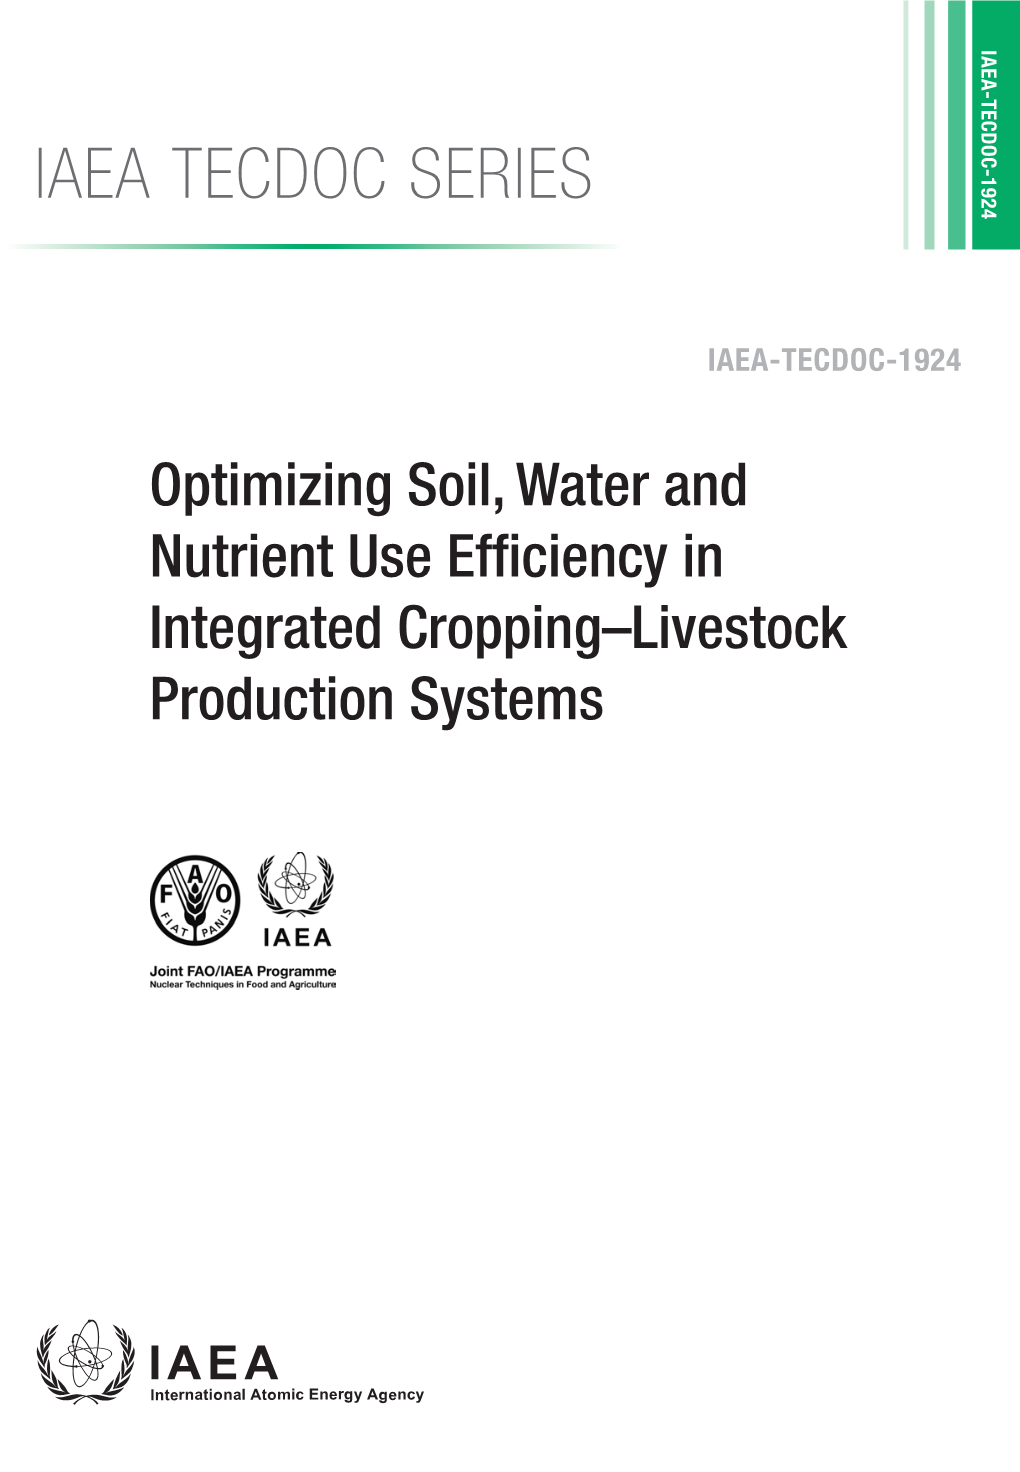 IAEA TECDOC SERIES Optimizing Soil, Water and Nutrient Use Efficiency Cropping–Livestock Production Systems in Integrated